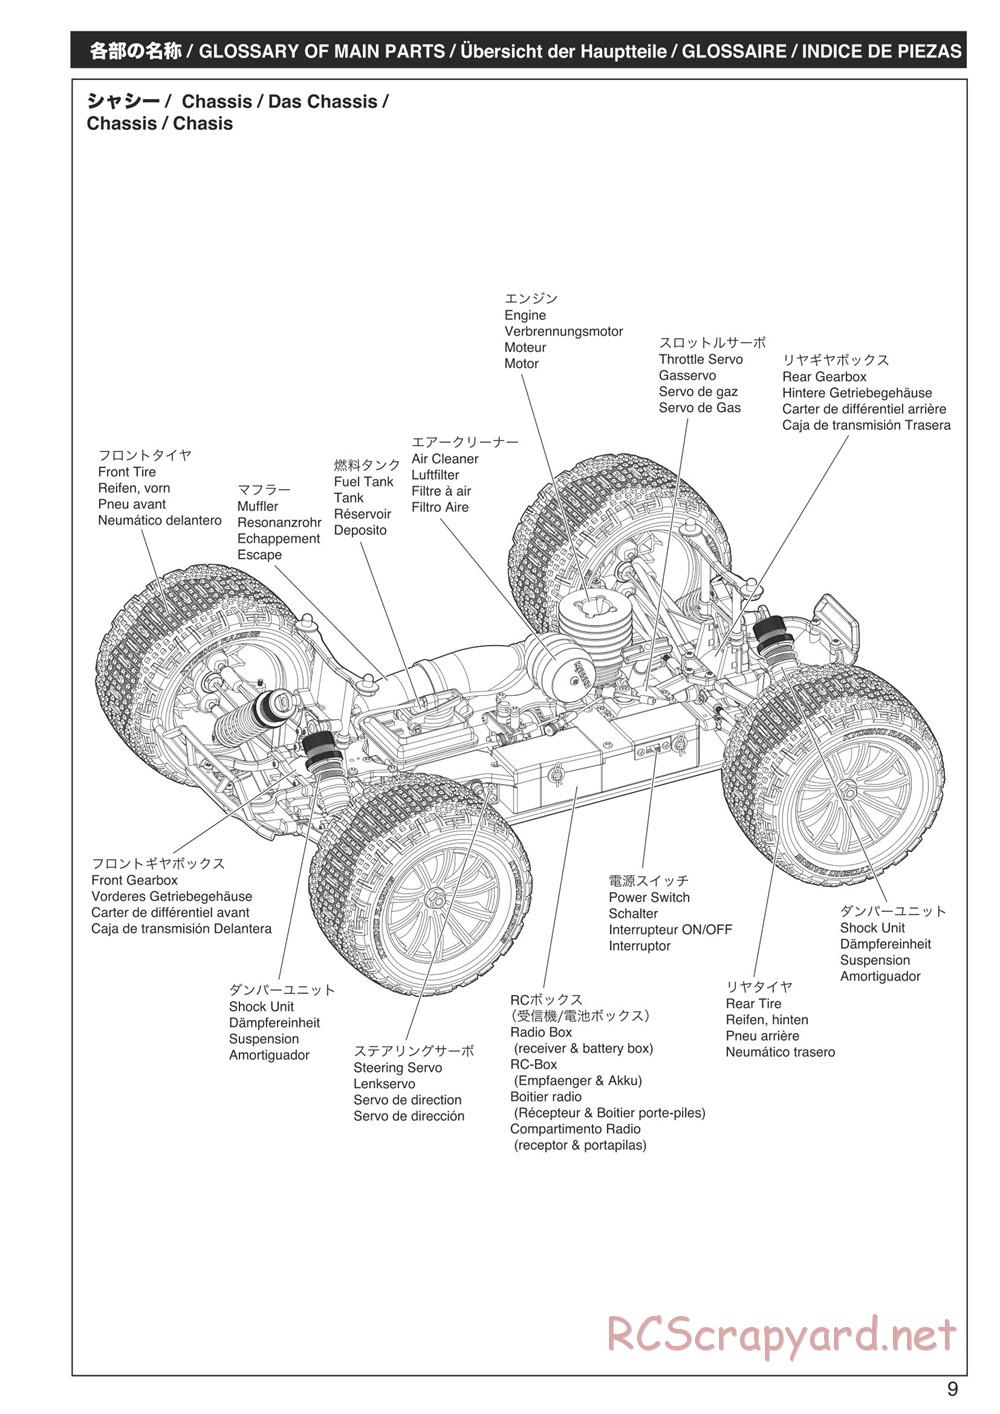 Kyosho - DMT - Manual - Page 9